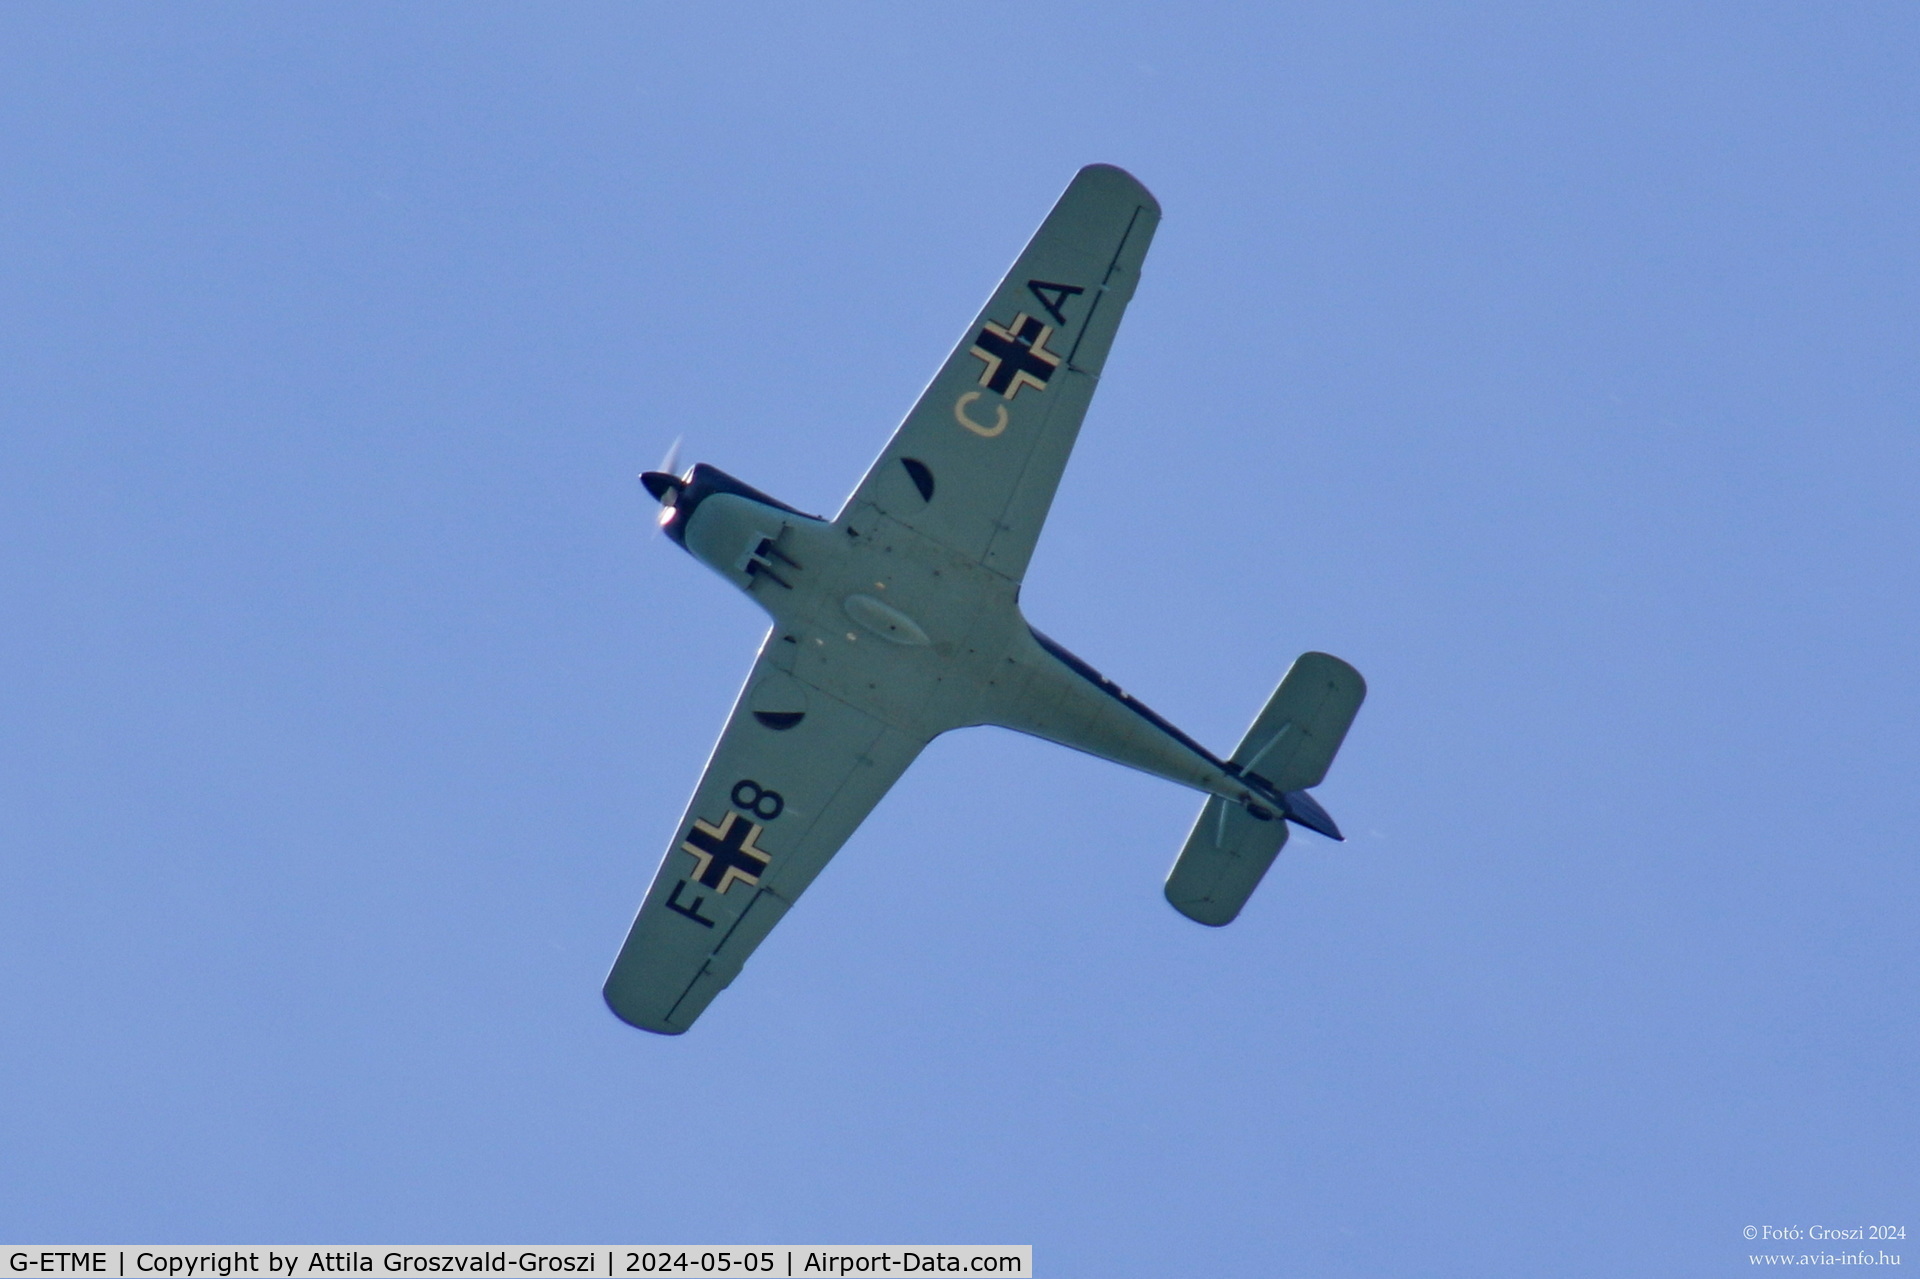 G-ETME, 1951 Nord 1002 Pingouin  II C/N 274, In the airspace of St. Margarethen, Austria